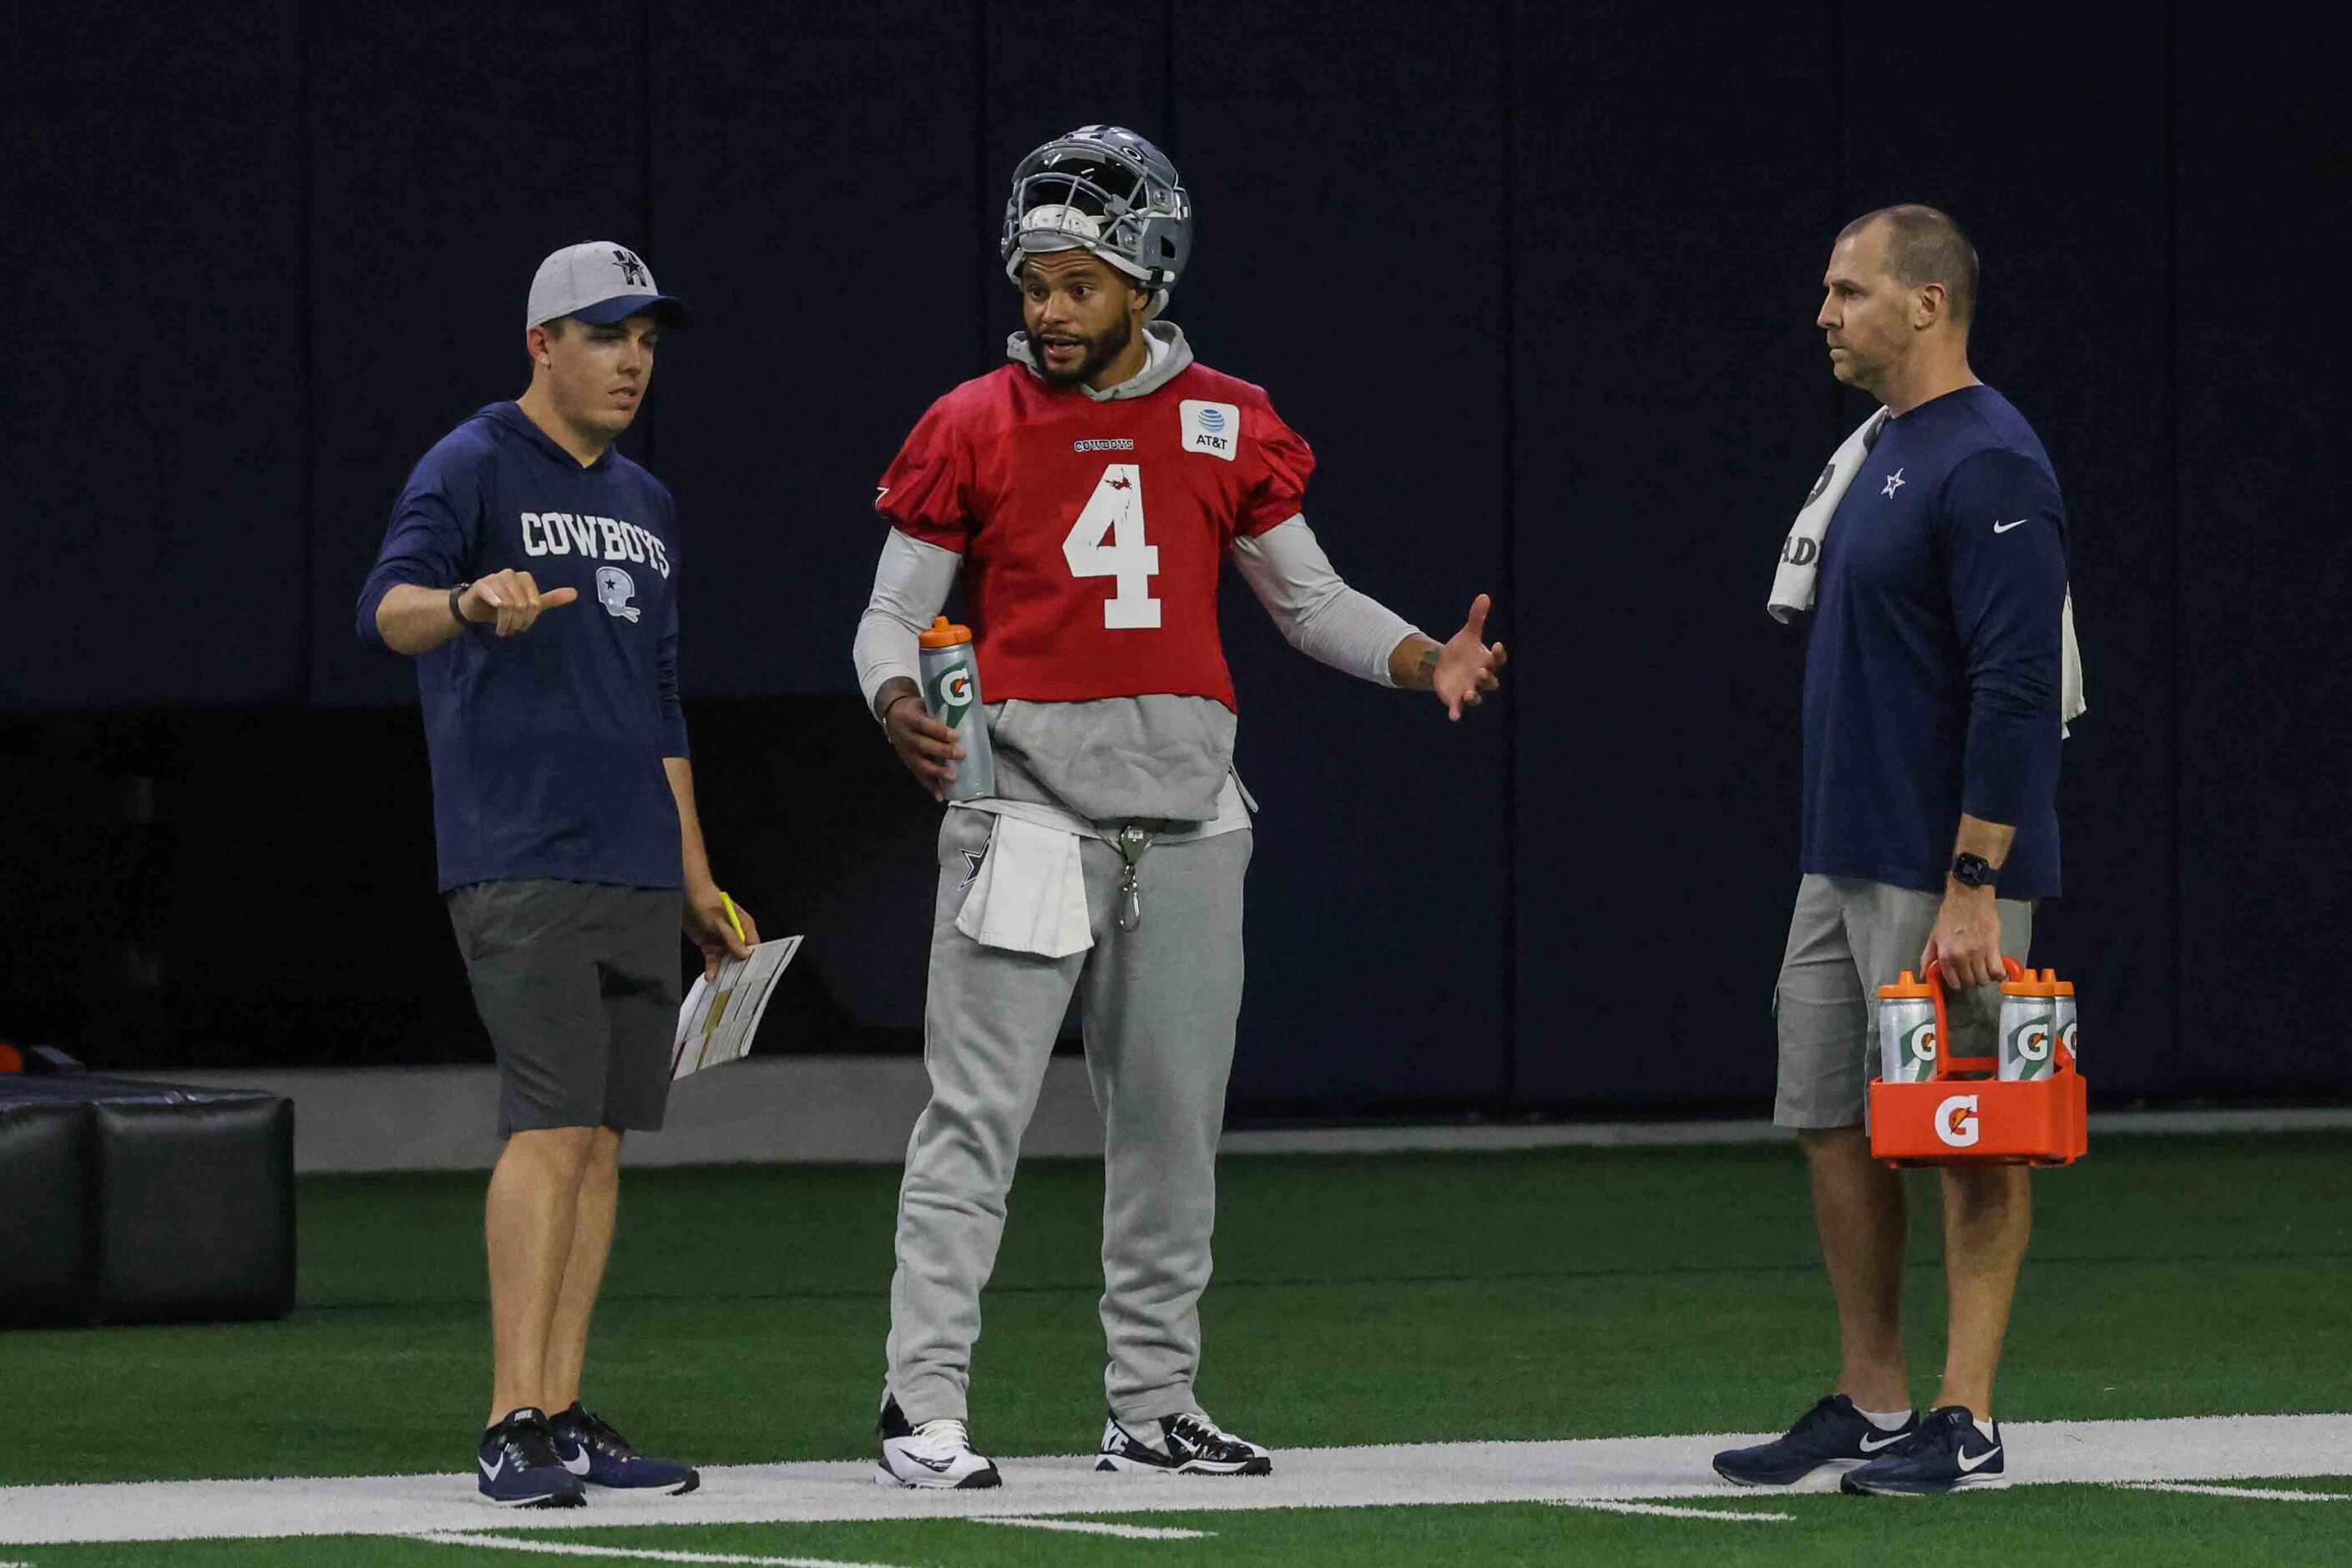 Cowboys' quarterback Dak Prescott #4 during practice at the Ford Center in Frisco on...